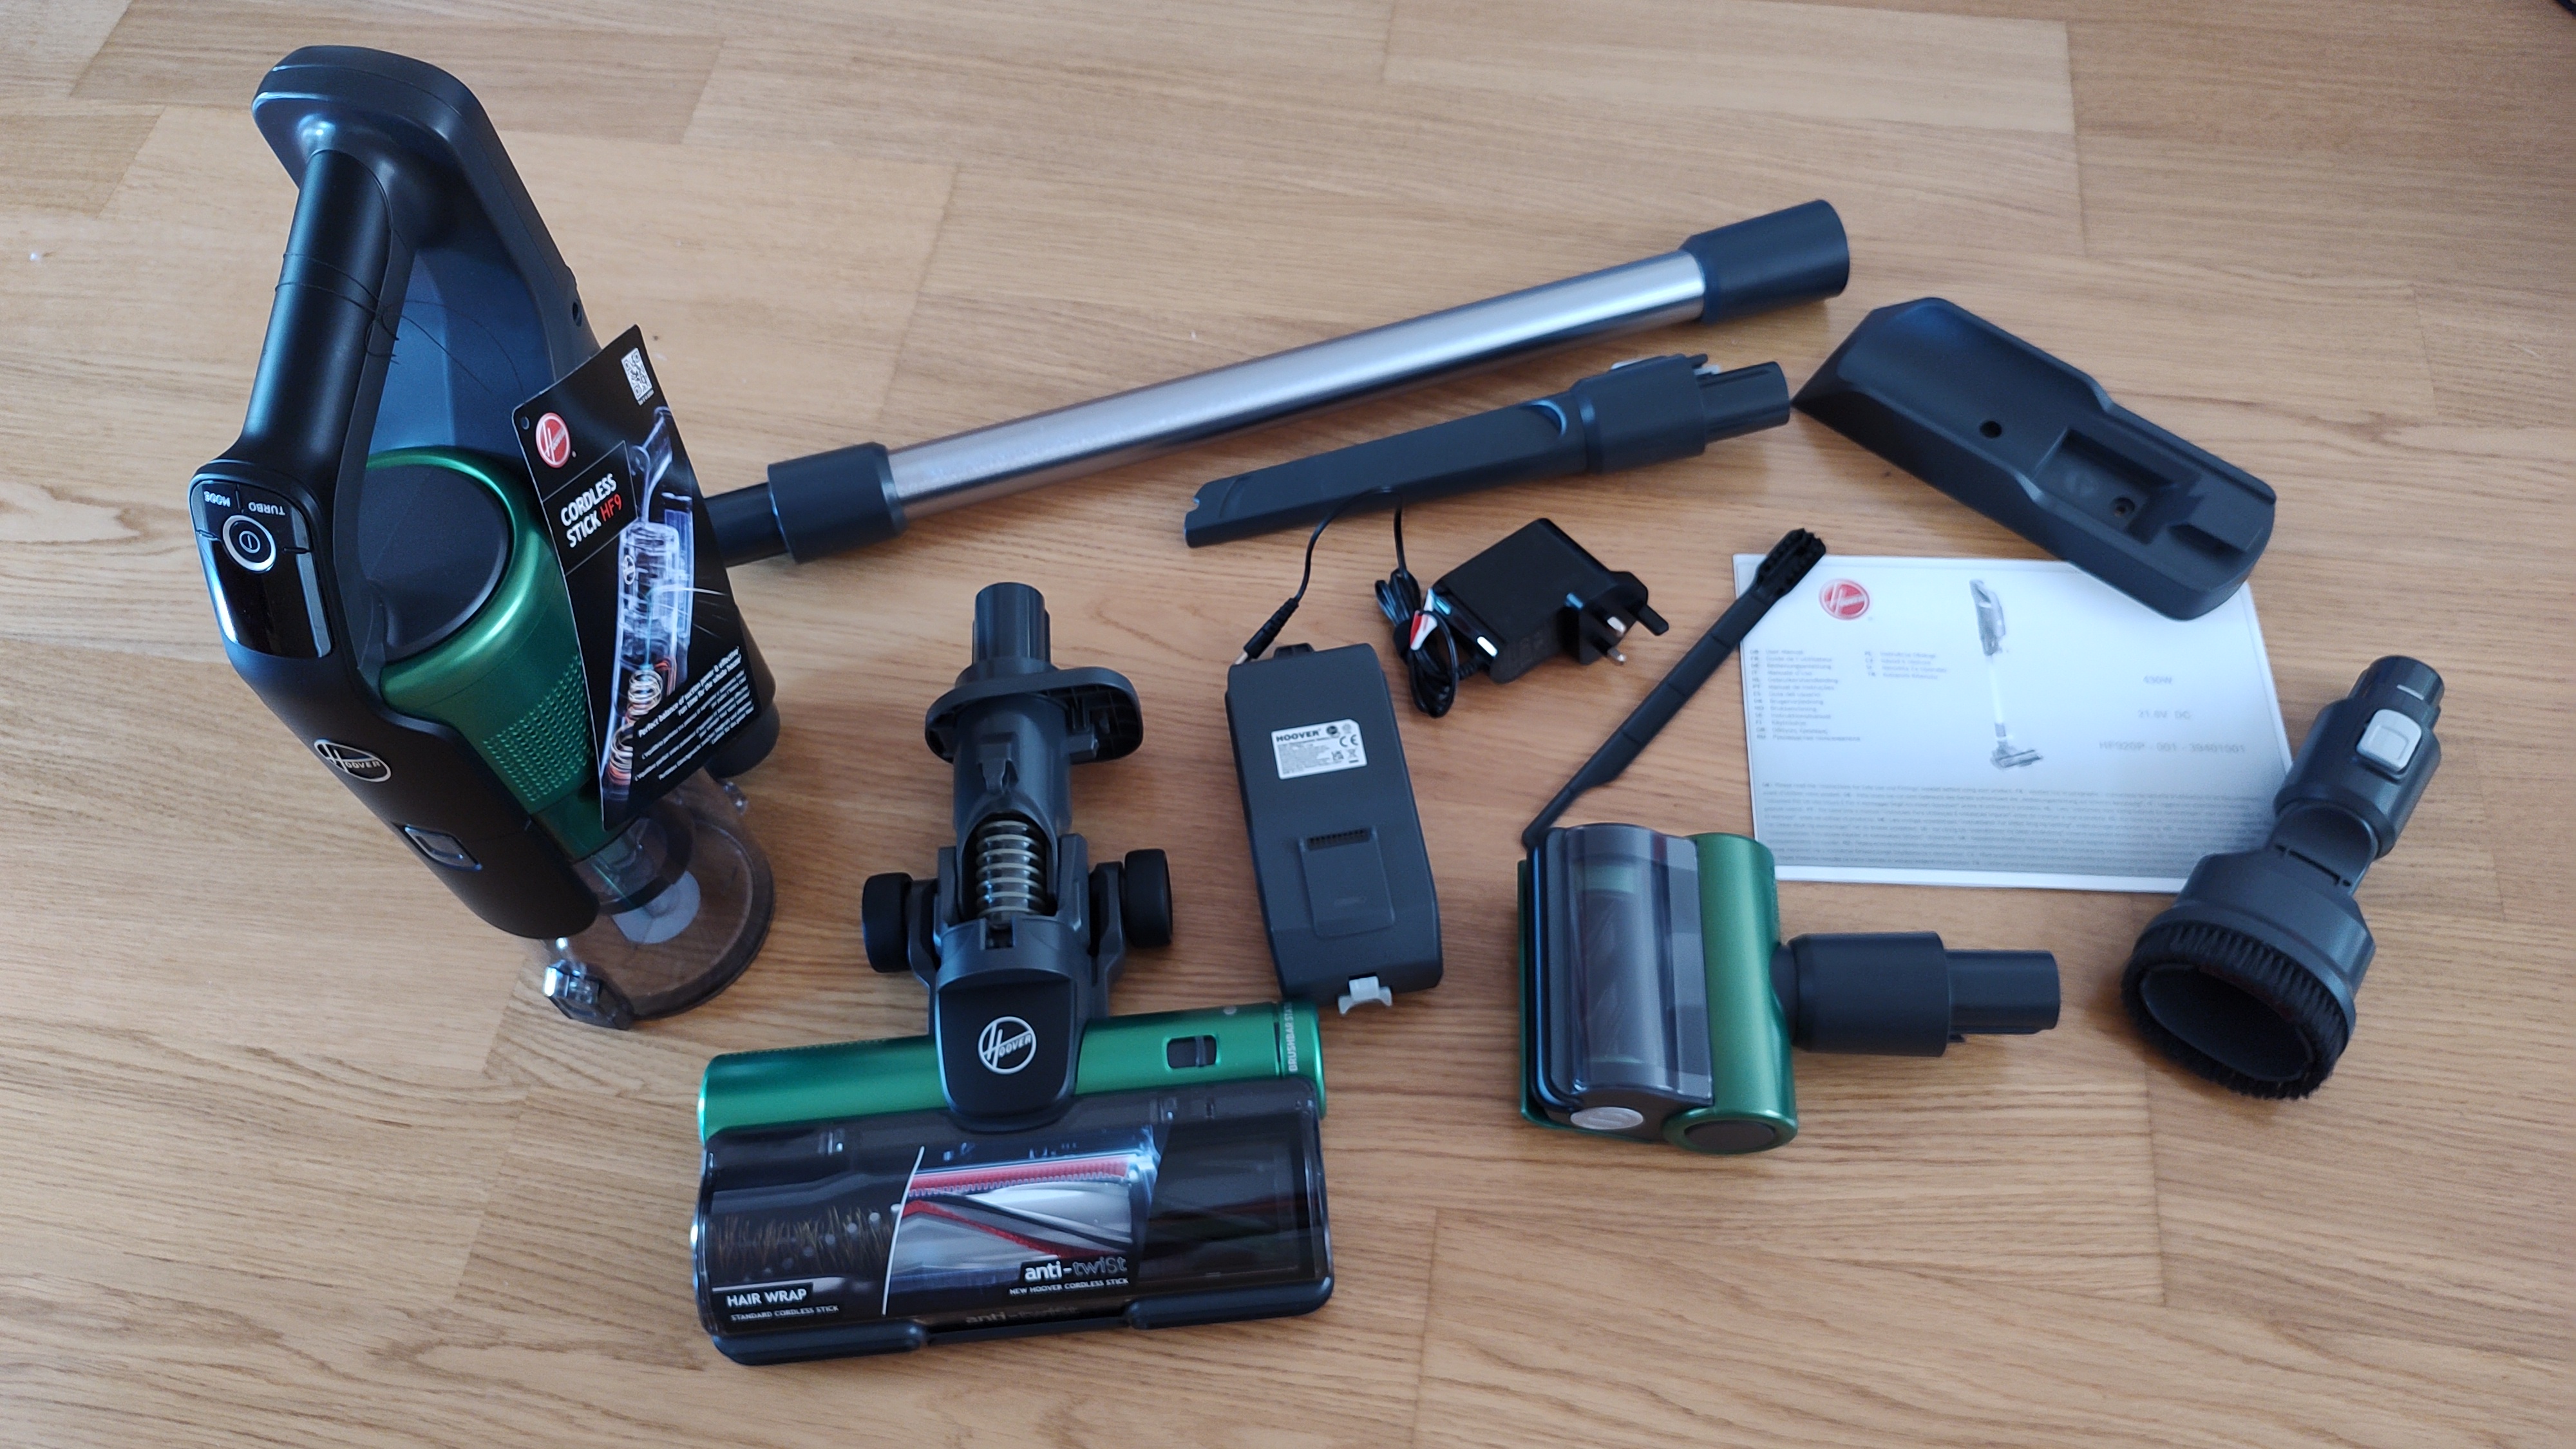 Hoover HF9 Cordless Vacuum review: fully portable and powerful too